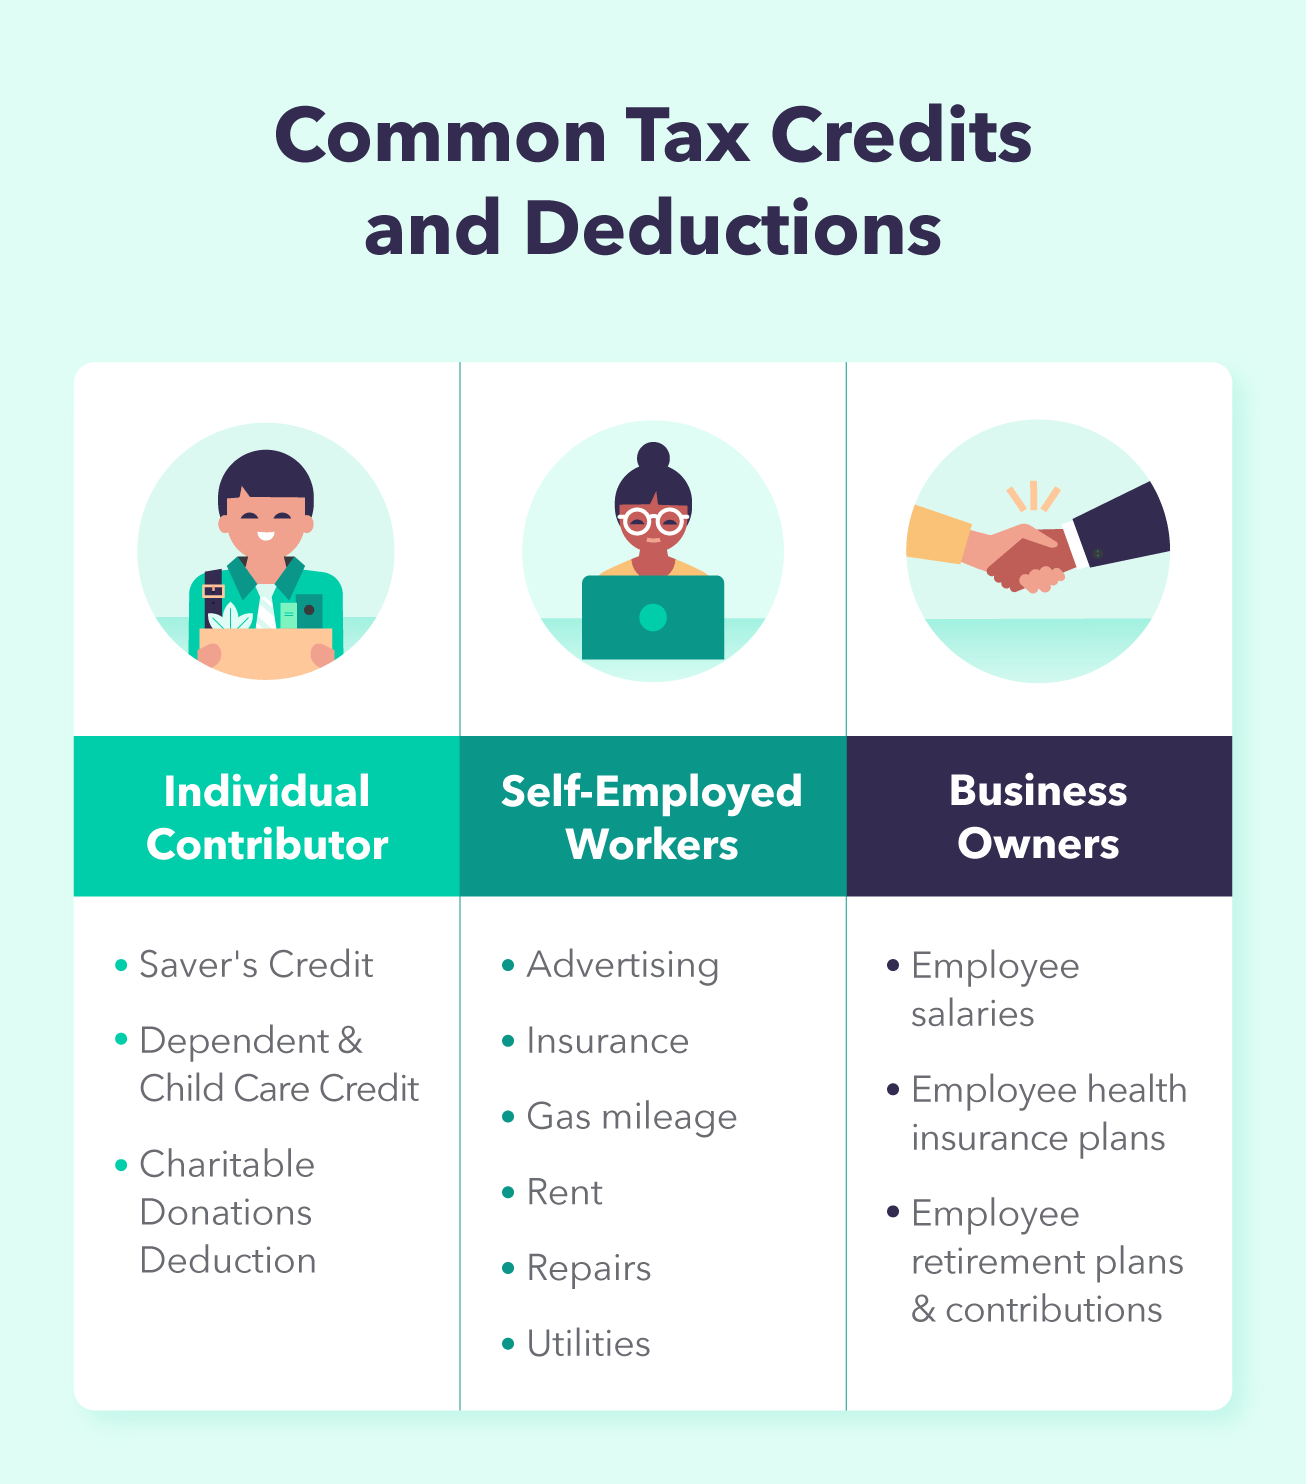 Common tax credits and deductions for individuals, self-employed workers, and business owners. 